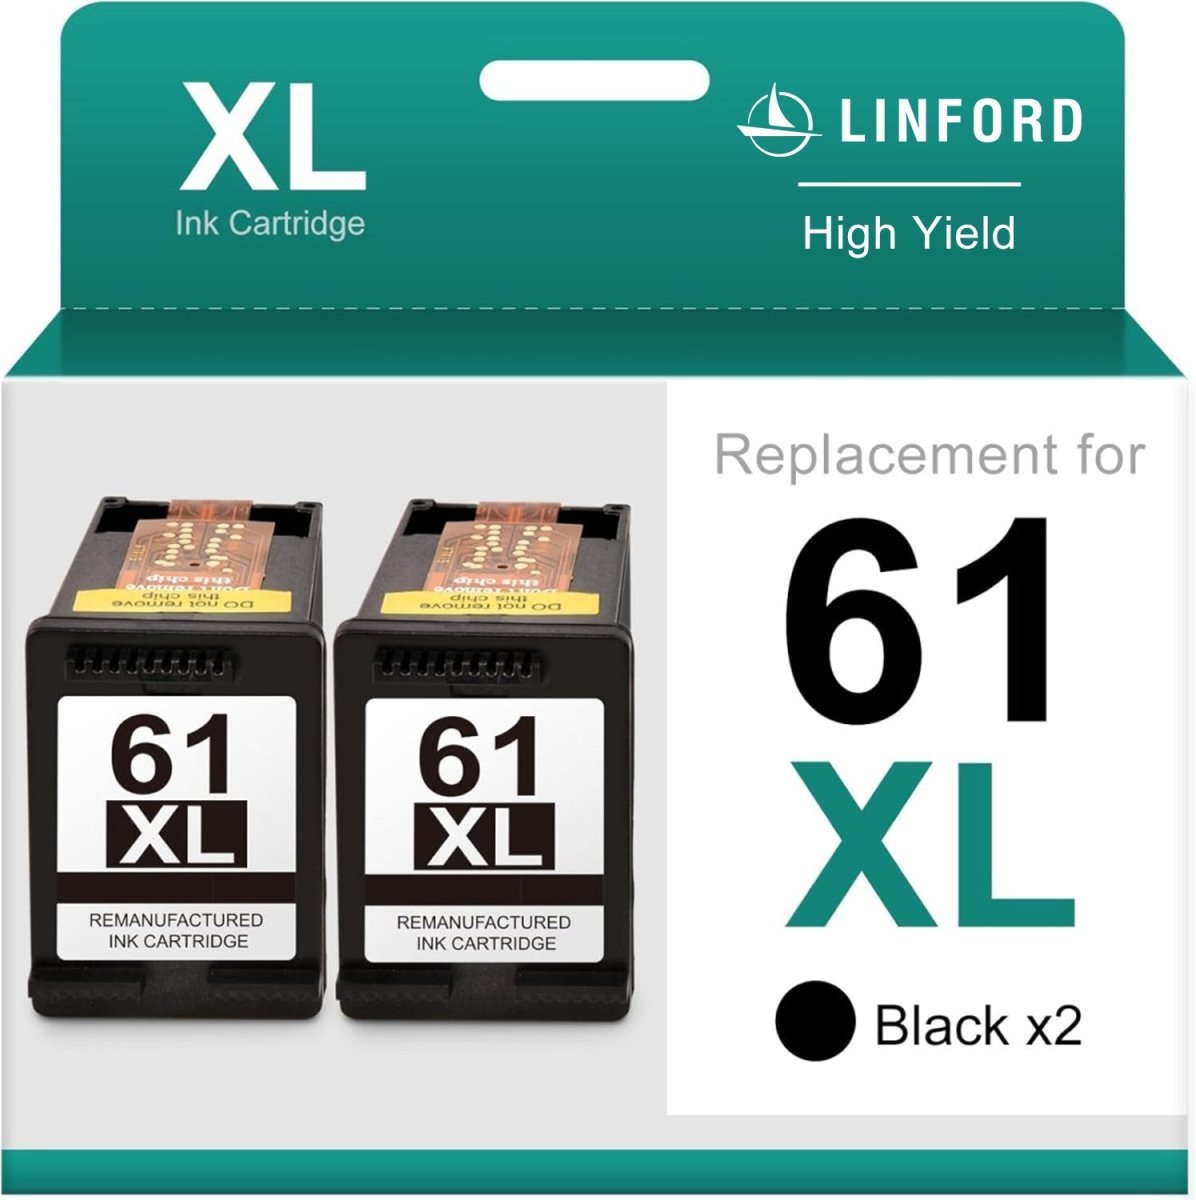 Remanufactured HP 61XL Black Ink Cartridge 2 Pack (CH563WN) High Yield - Linford Office:Printer Ink & Toner Cartridge